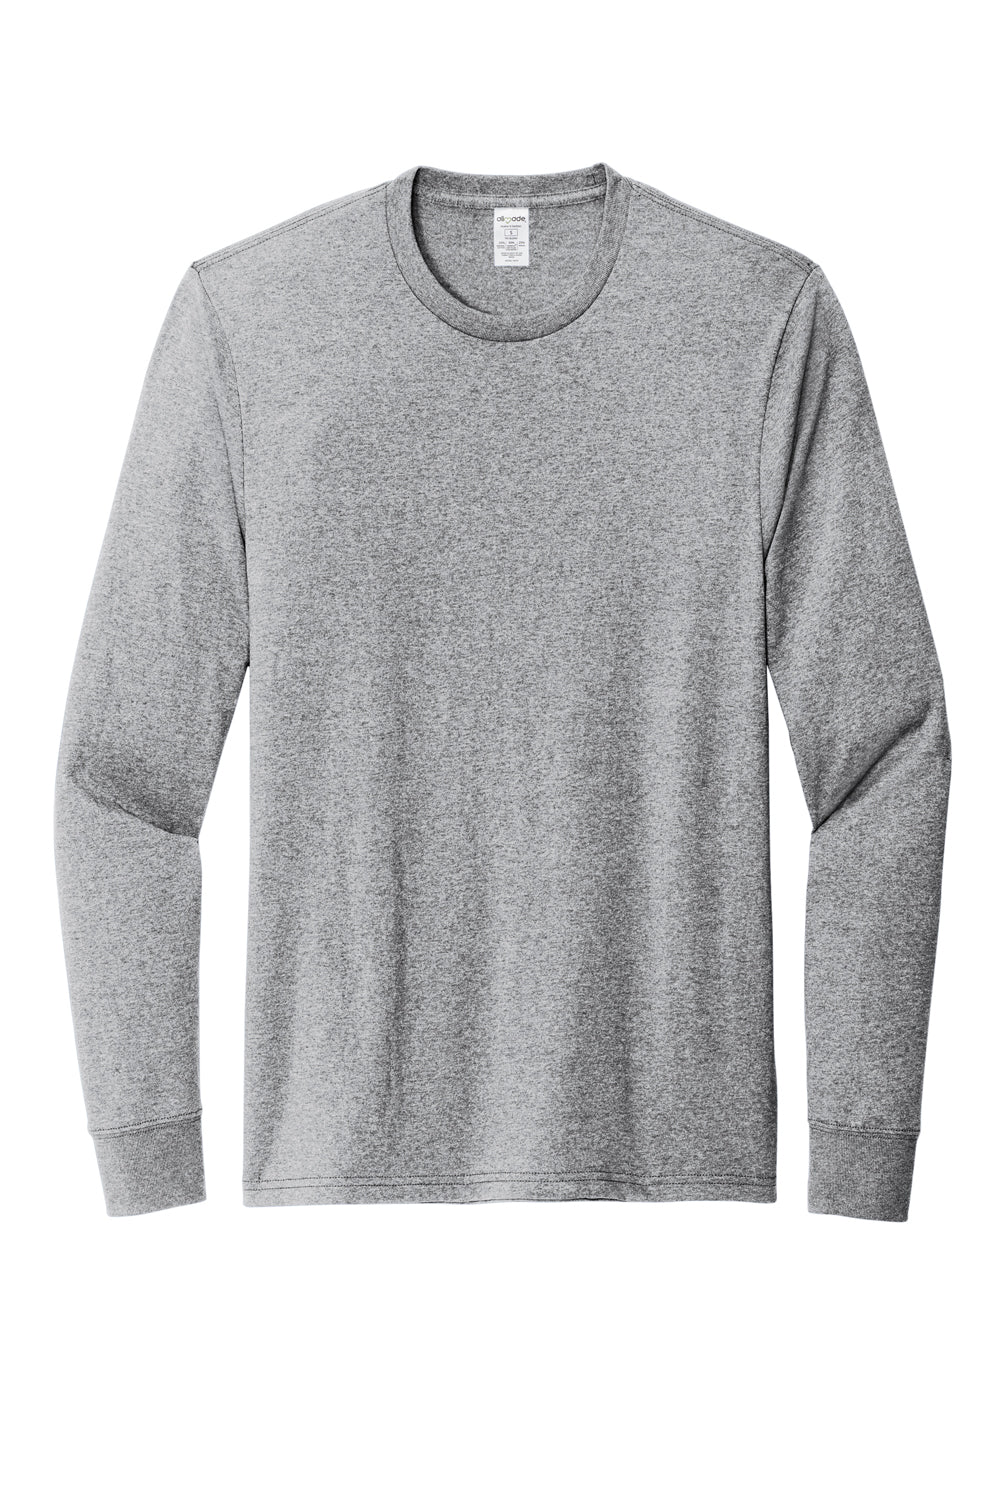 Allmade AL6204 Mens Recycled Long Sleeve Crewneck T-Shirt Heather Remade Grey Flat Front